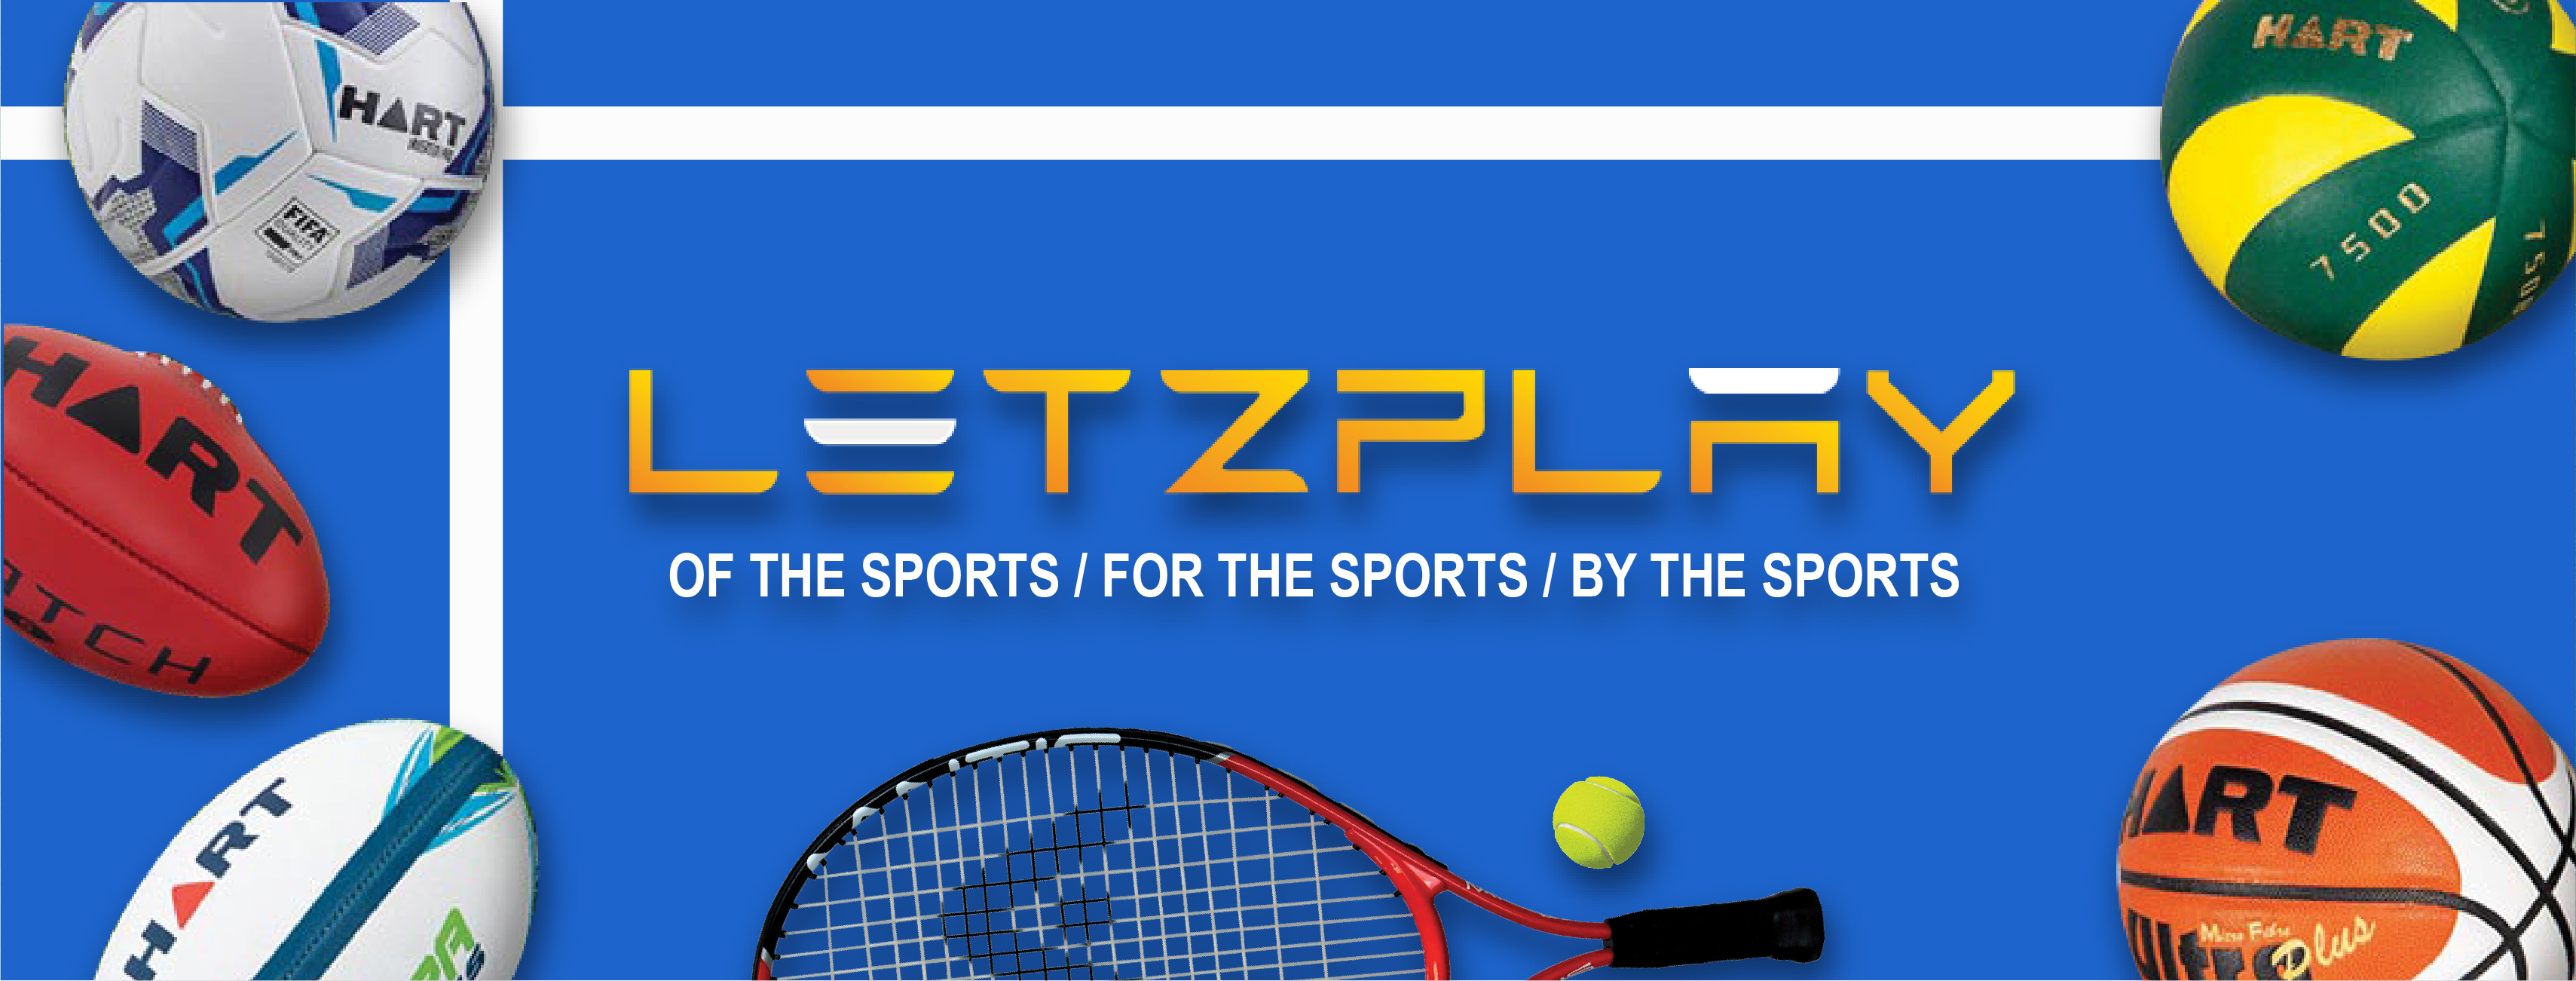 Letzplay Banner